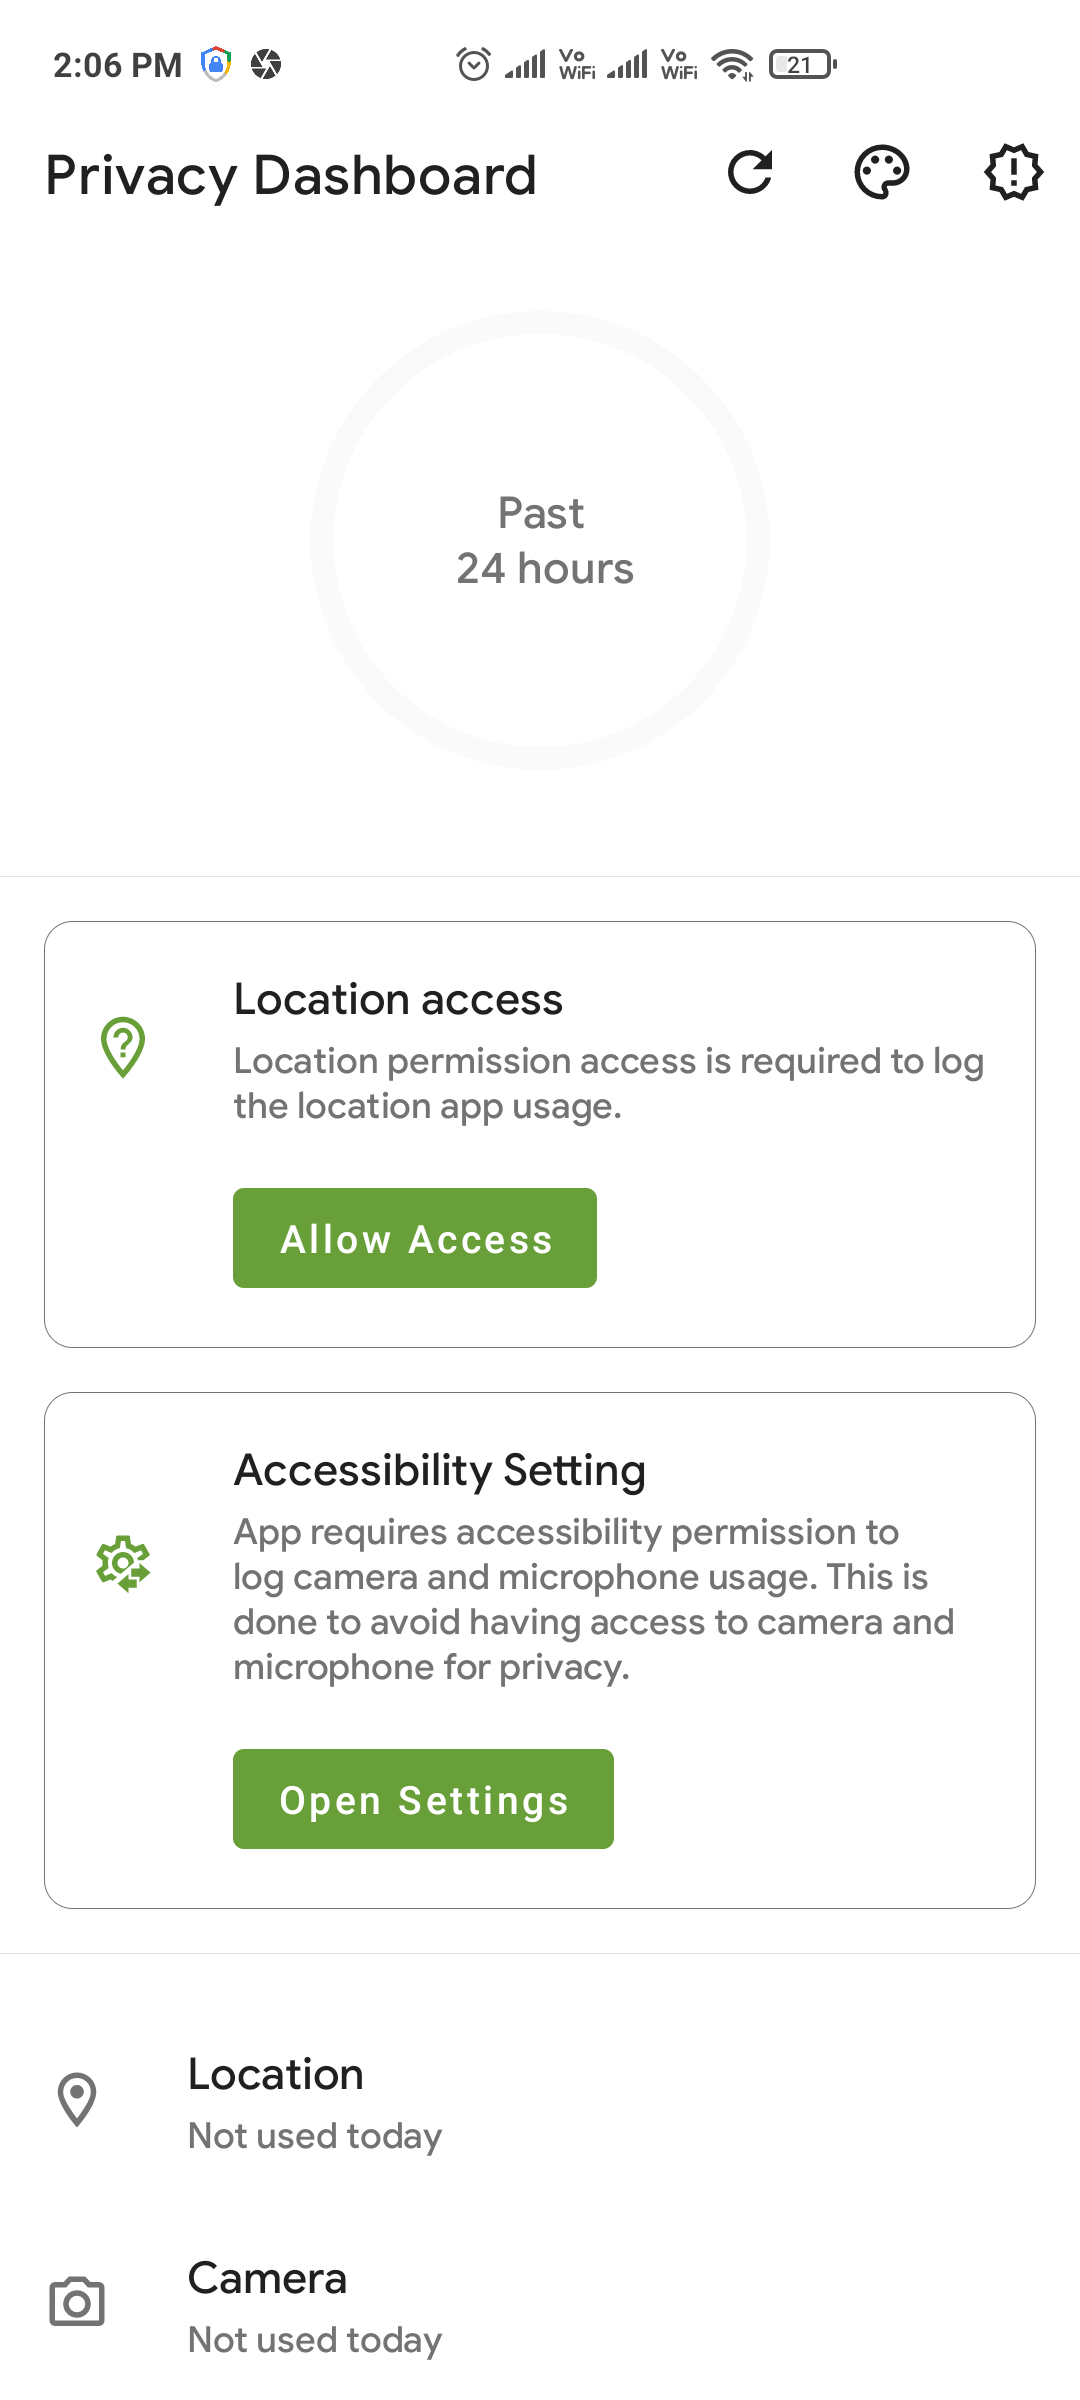 Privacy Dashboard asking for Location and Accessibility access